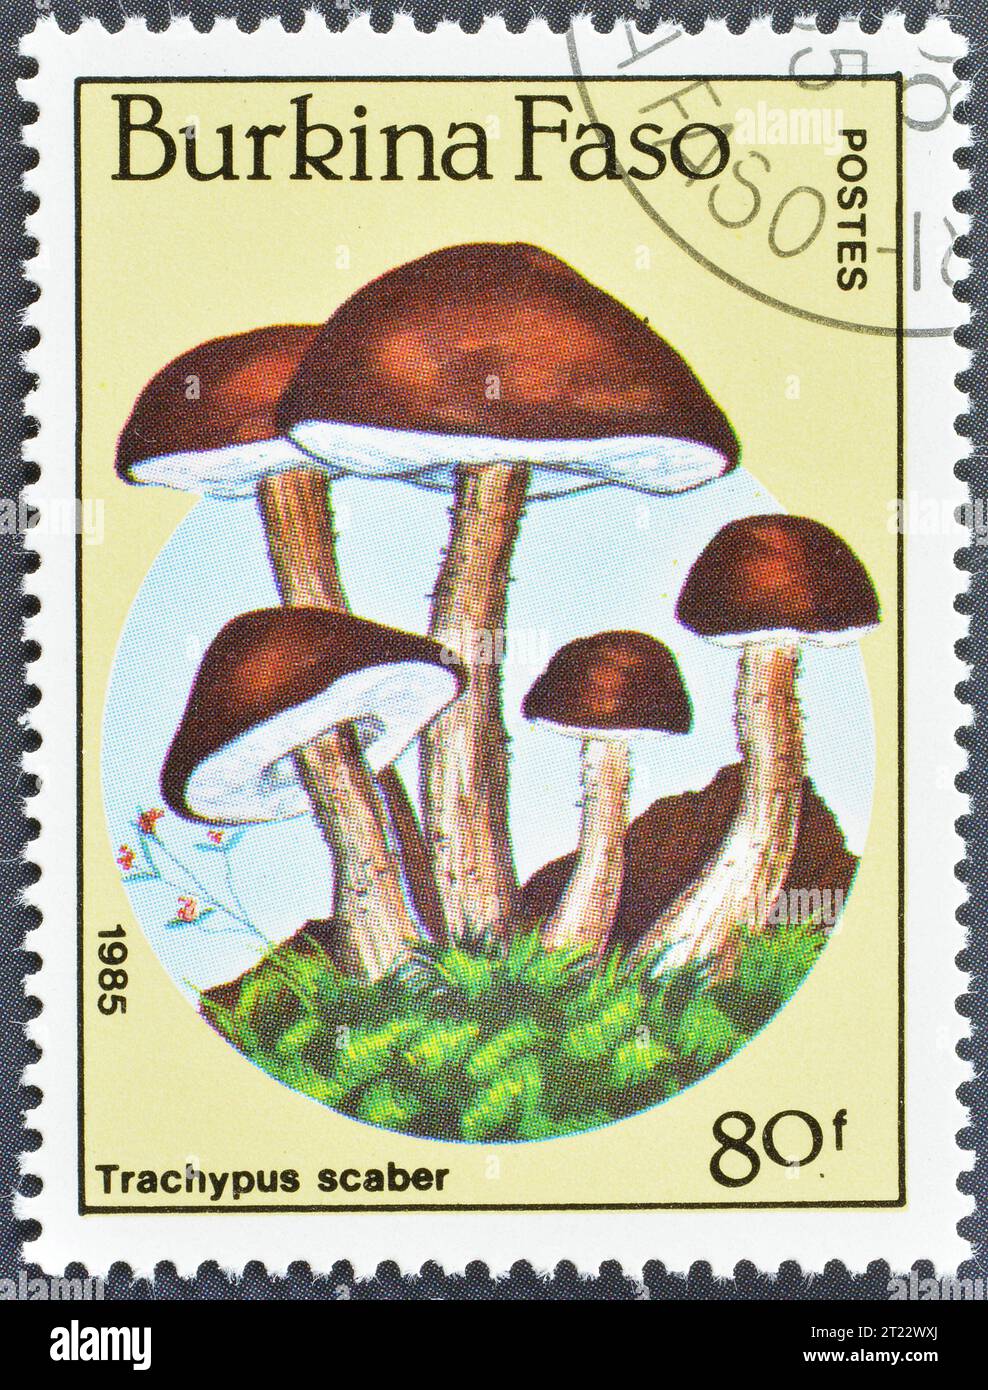 Cancelled postage stamp printed by Burkina Faso, that shows Trachypus scaber, Ghost bolete mushroom, circa 1985. Stock Photo